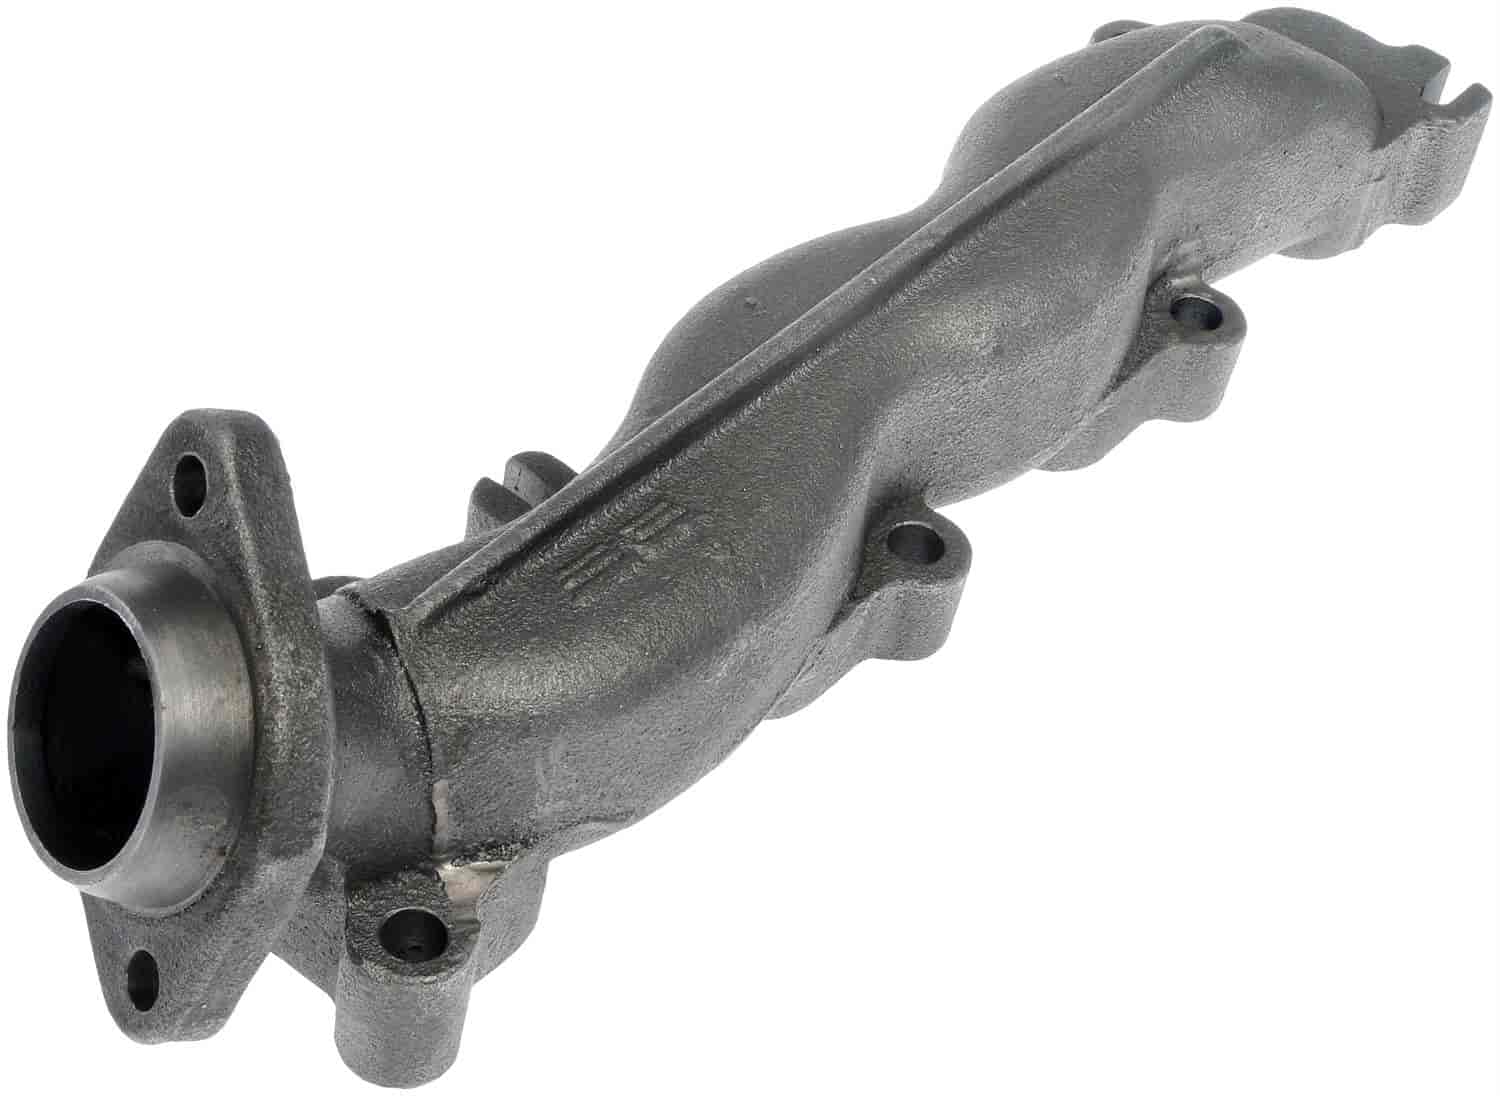 Exhaust Manifold Kit - Includes Gaskets And Hardware